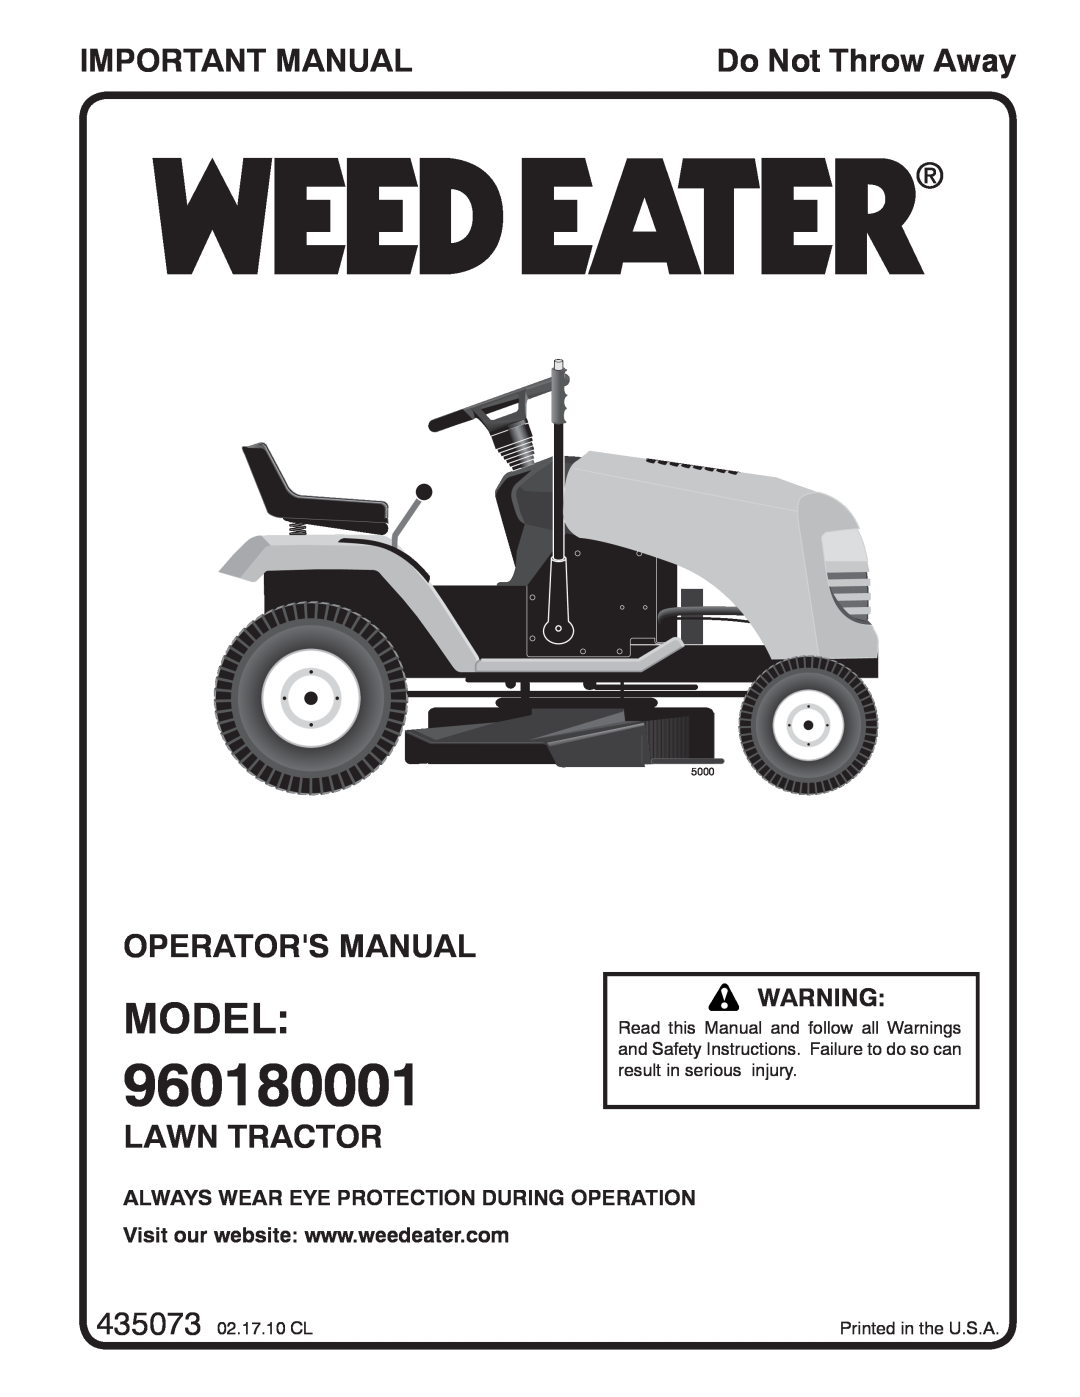 Weed Eater 96018000100, 435073 manual Model, Important Manual, Operators Manual, Lawn Tractor, Do Not Throw Away, 5000 